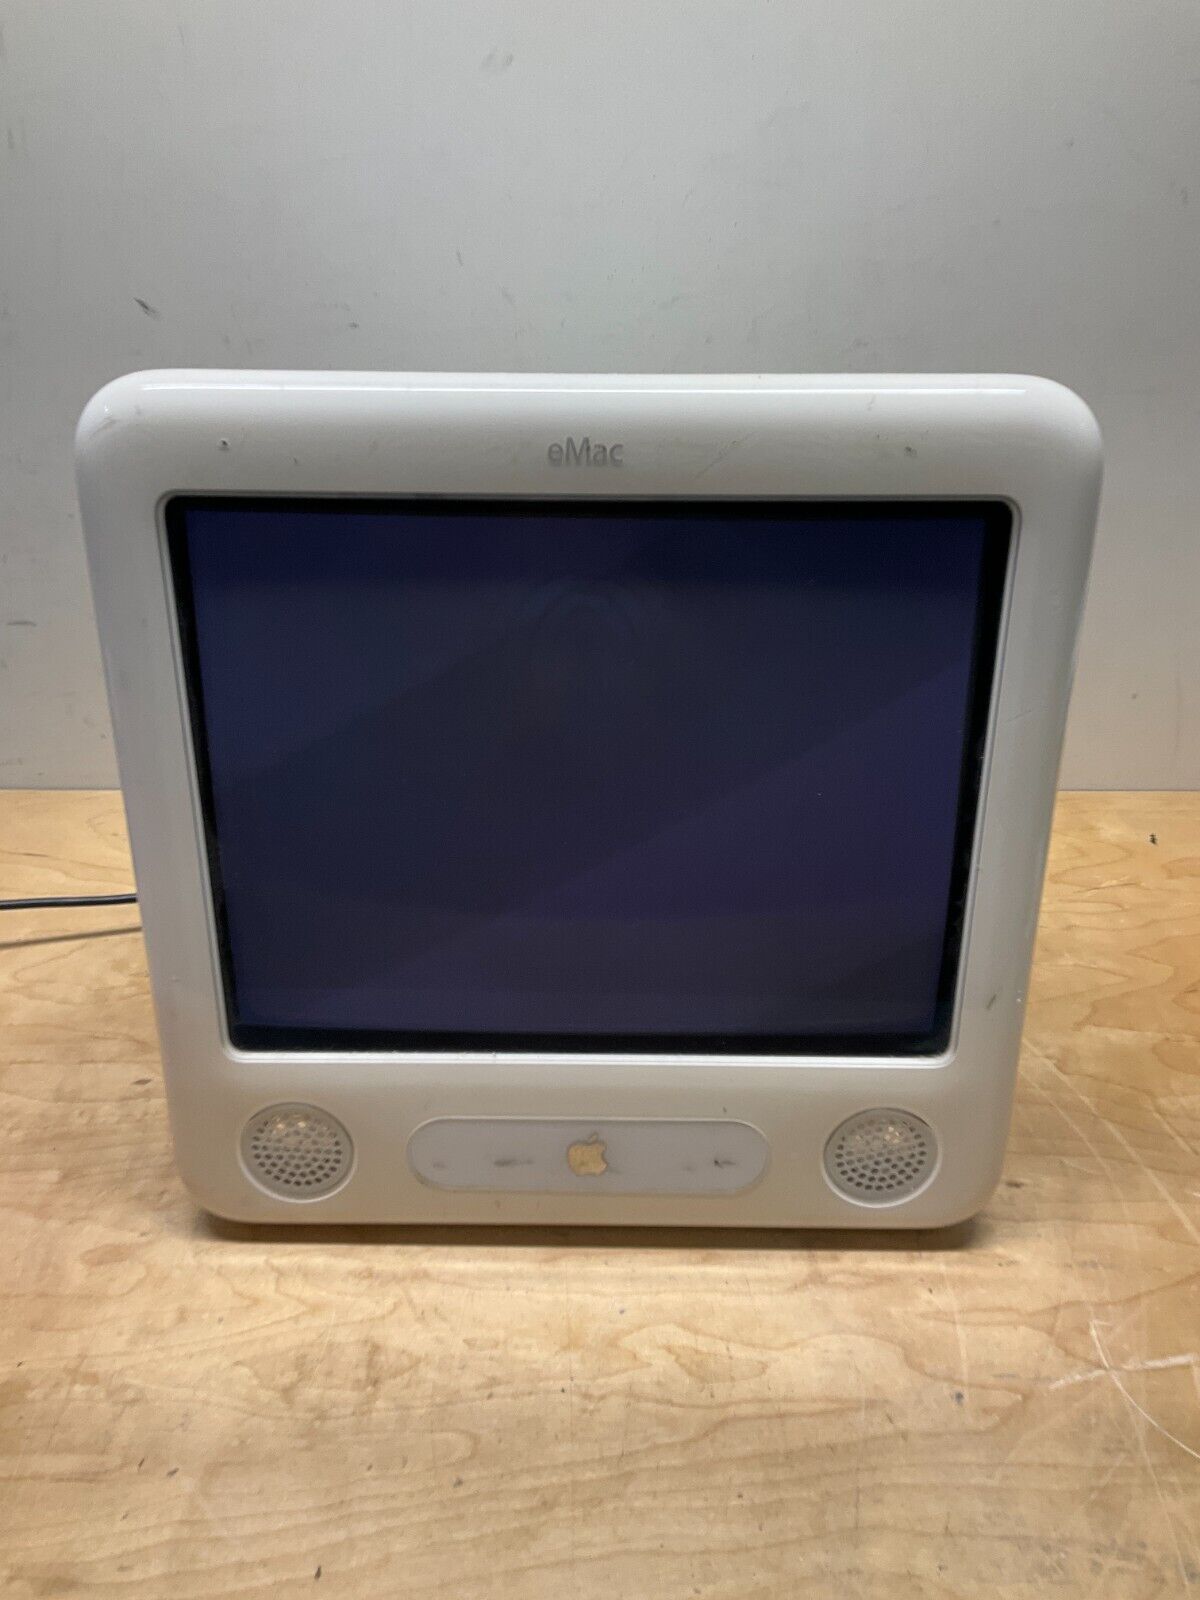  Apple eMac A1002 All in One Power PC vintage computer power PC G4 800 MHz